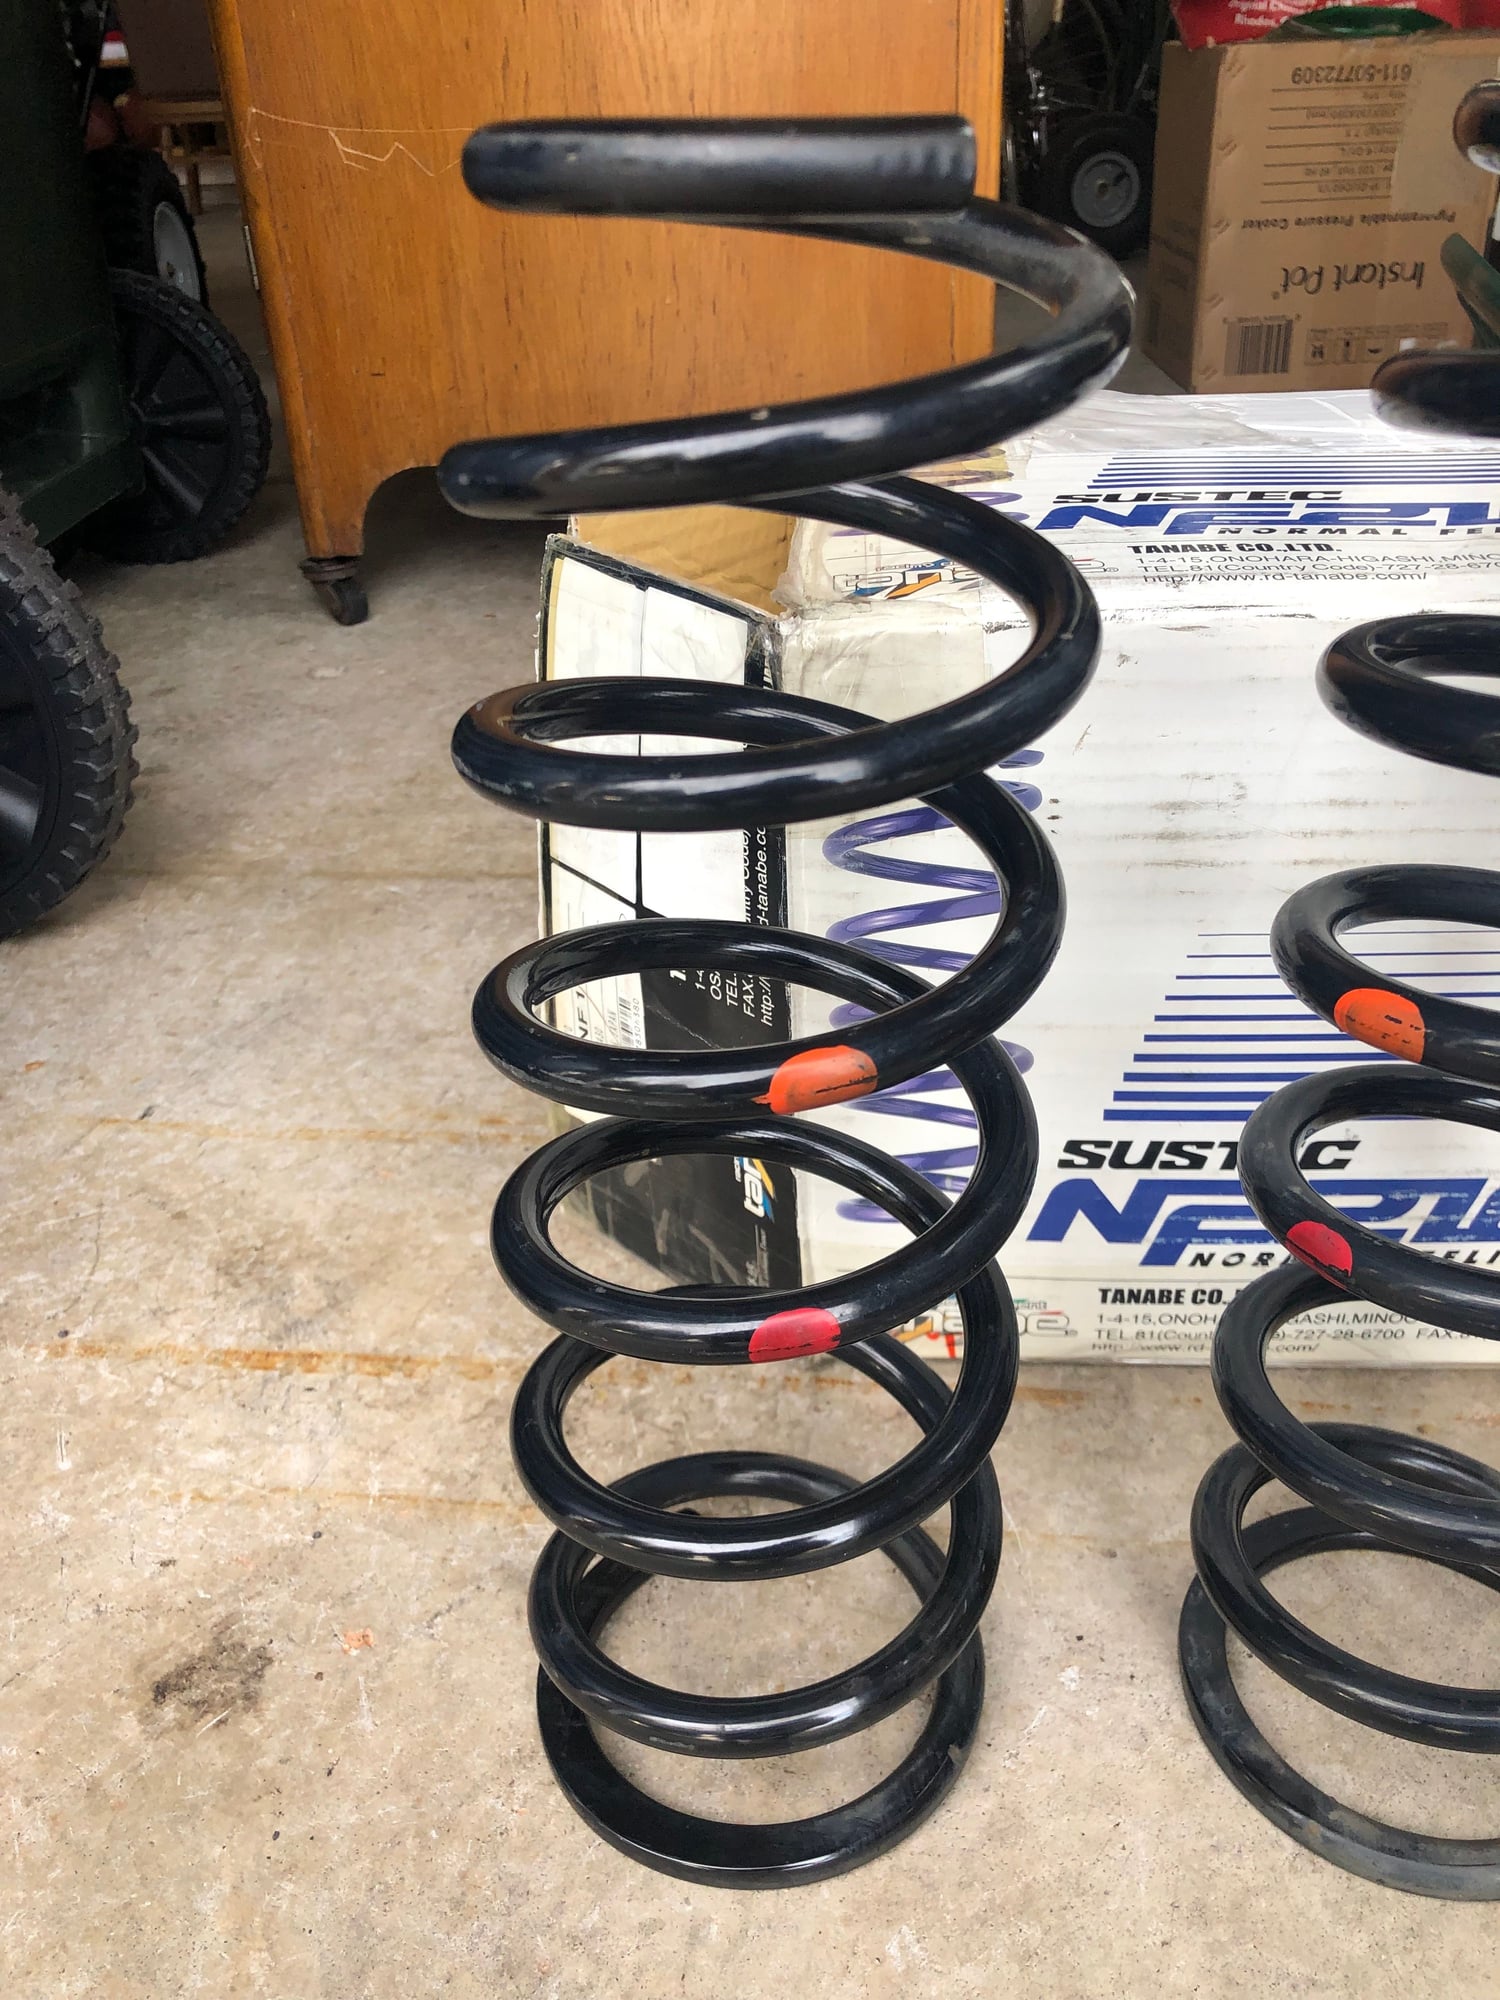 Steering/Suspension - FS: 2006 Lexus GS300 AWD Factory Springs - Used - 2006 to 2011 Lexus GS300 - Centreville, VA 20124, United States